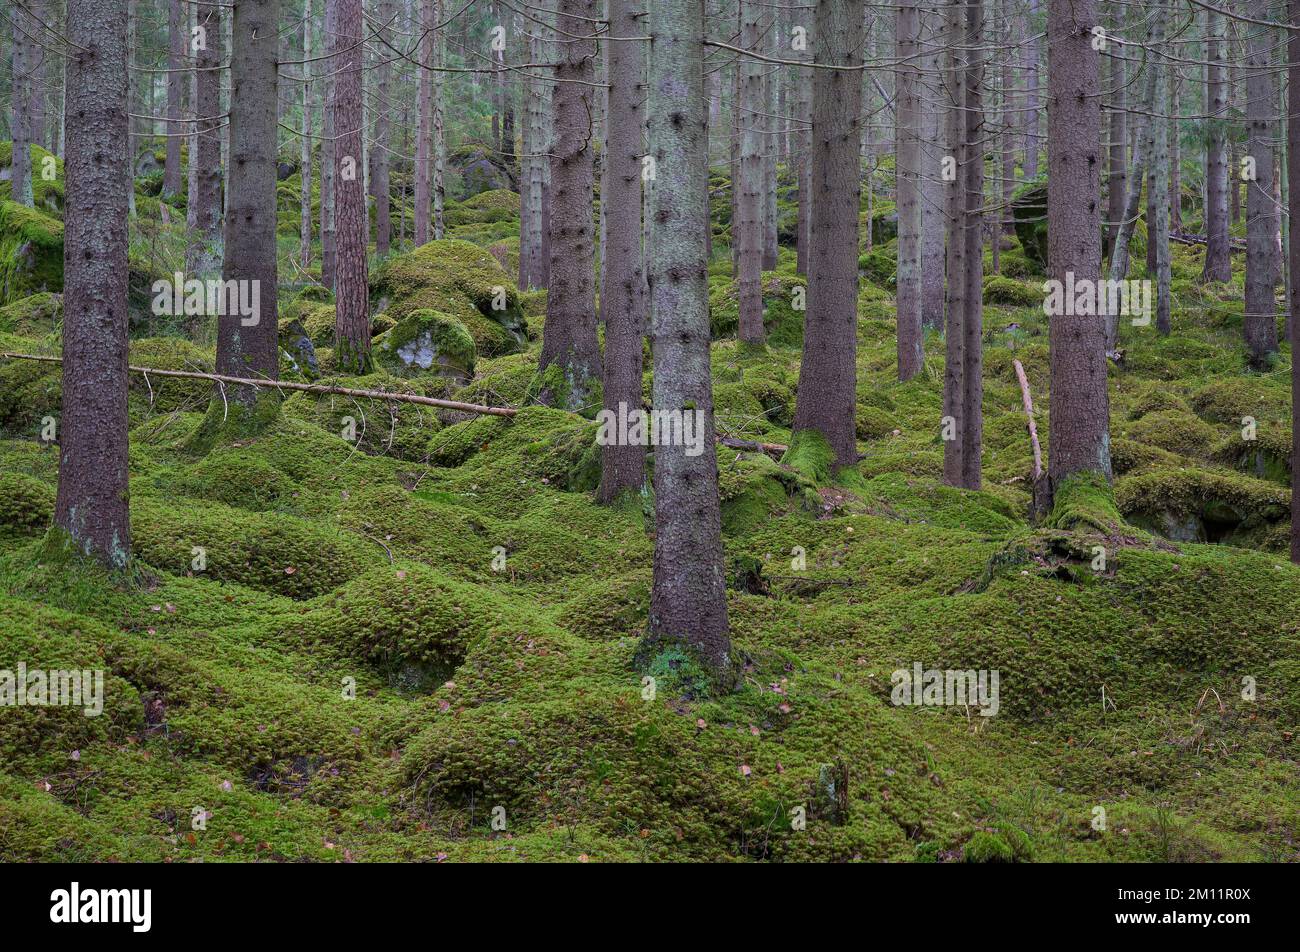 Sweden, Värmland, Degerfors, sprucetree forest with green mosscovered ground Stock Photo